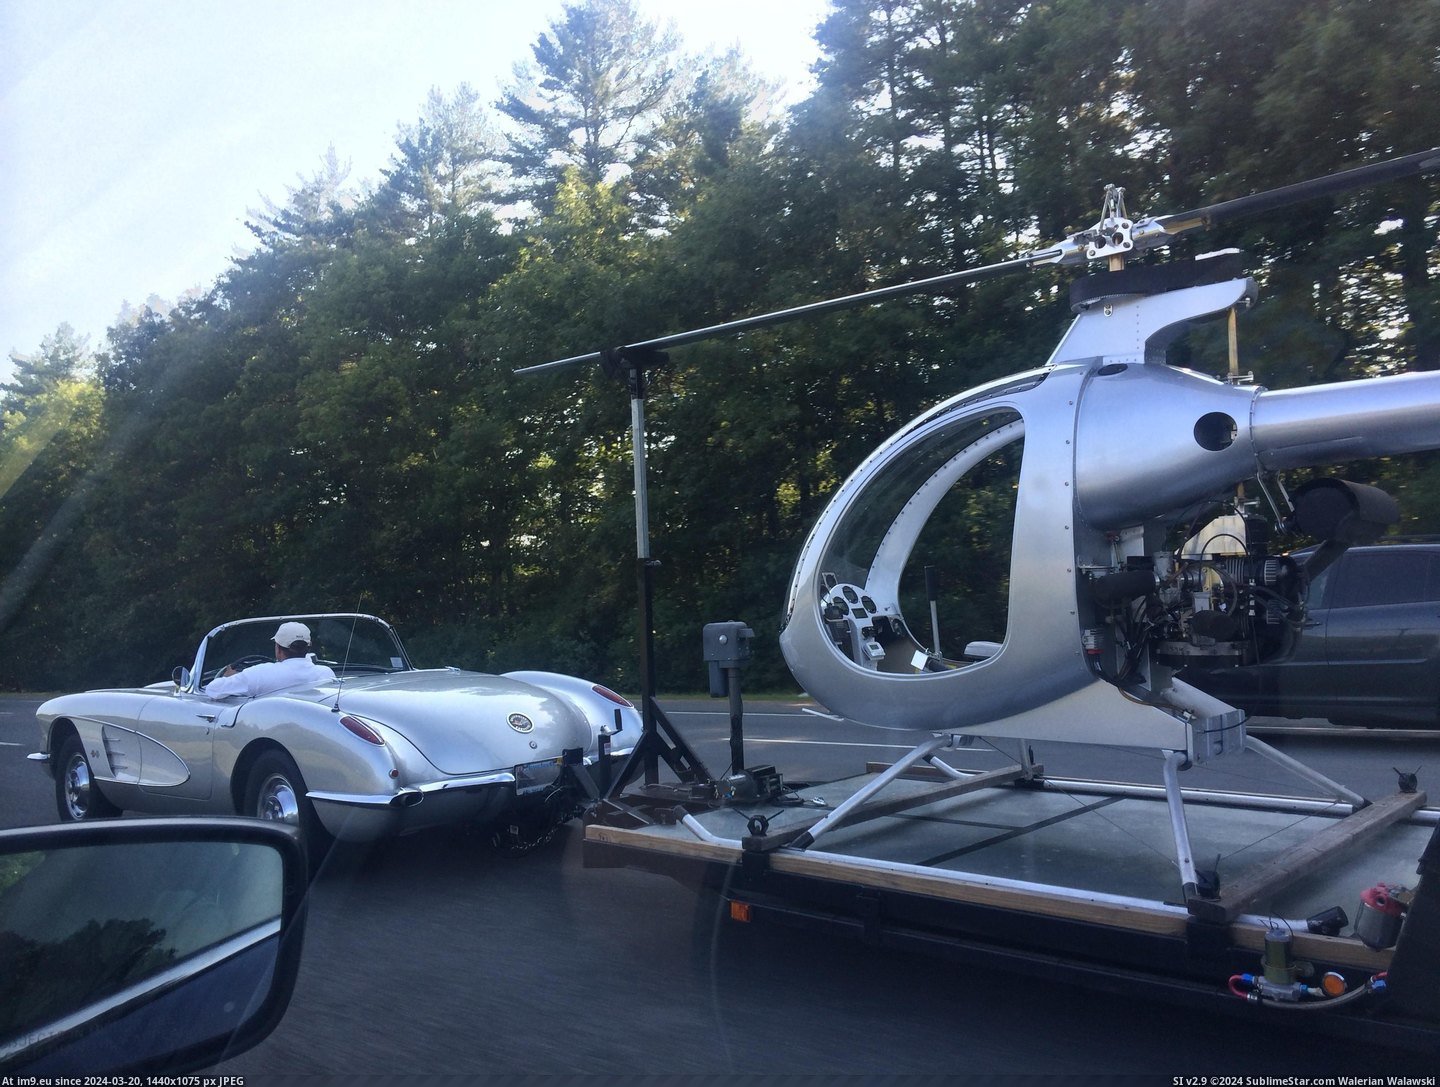 #Guy #Life #Towing #Corvette #Helicopter #Winning [Pics] 50's corvette towing a helicopter. this guy is winning at life. Pic. (Изображение из альбом My r/PICS favs))